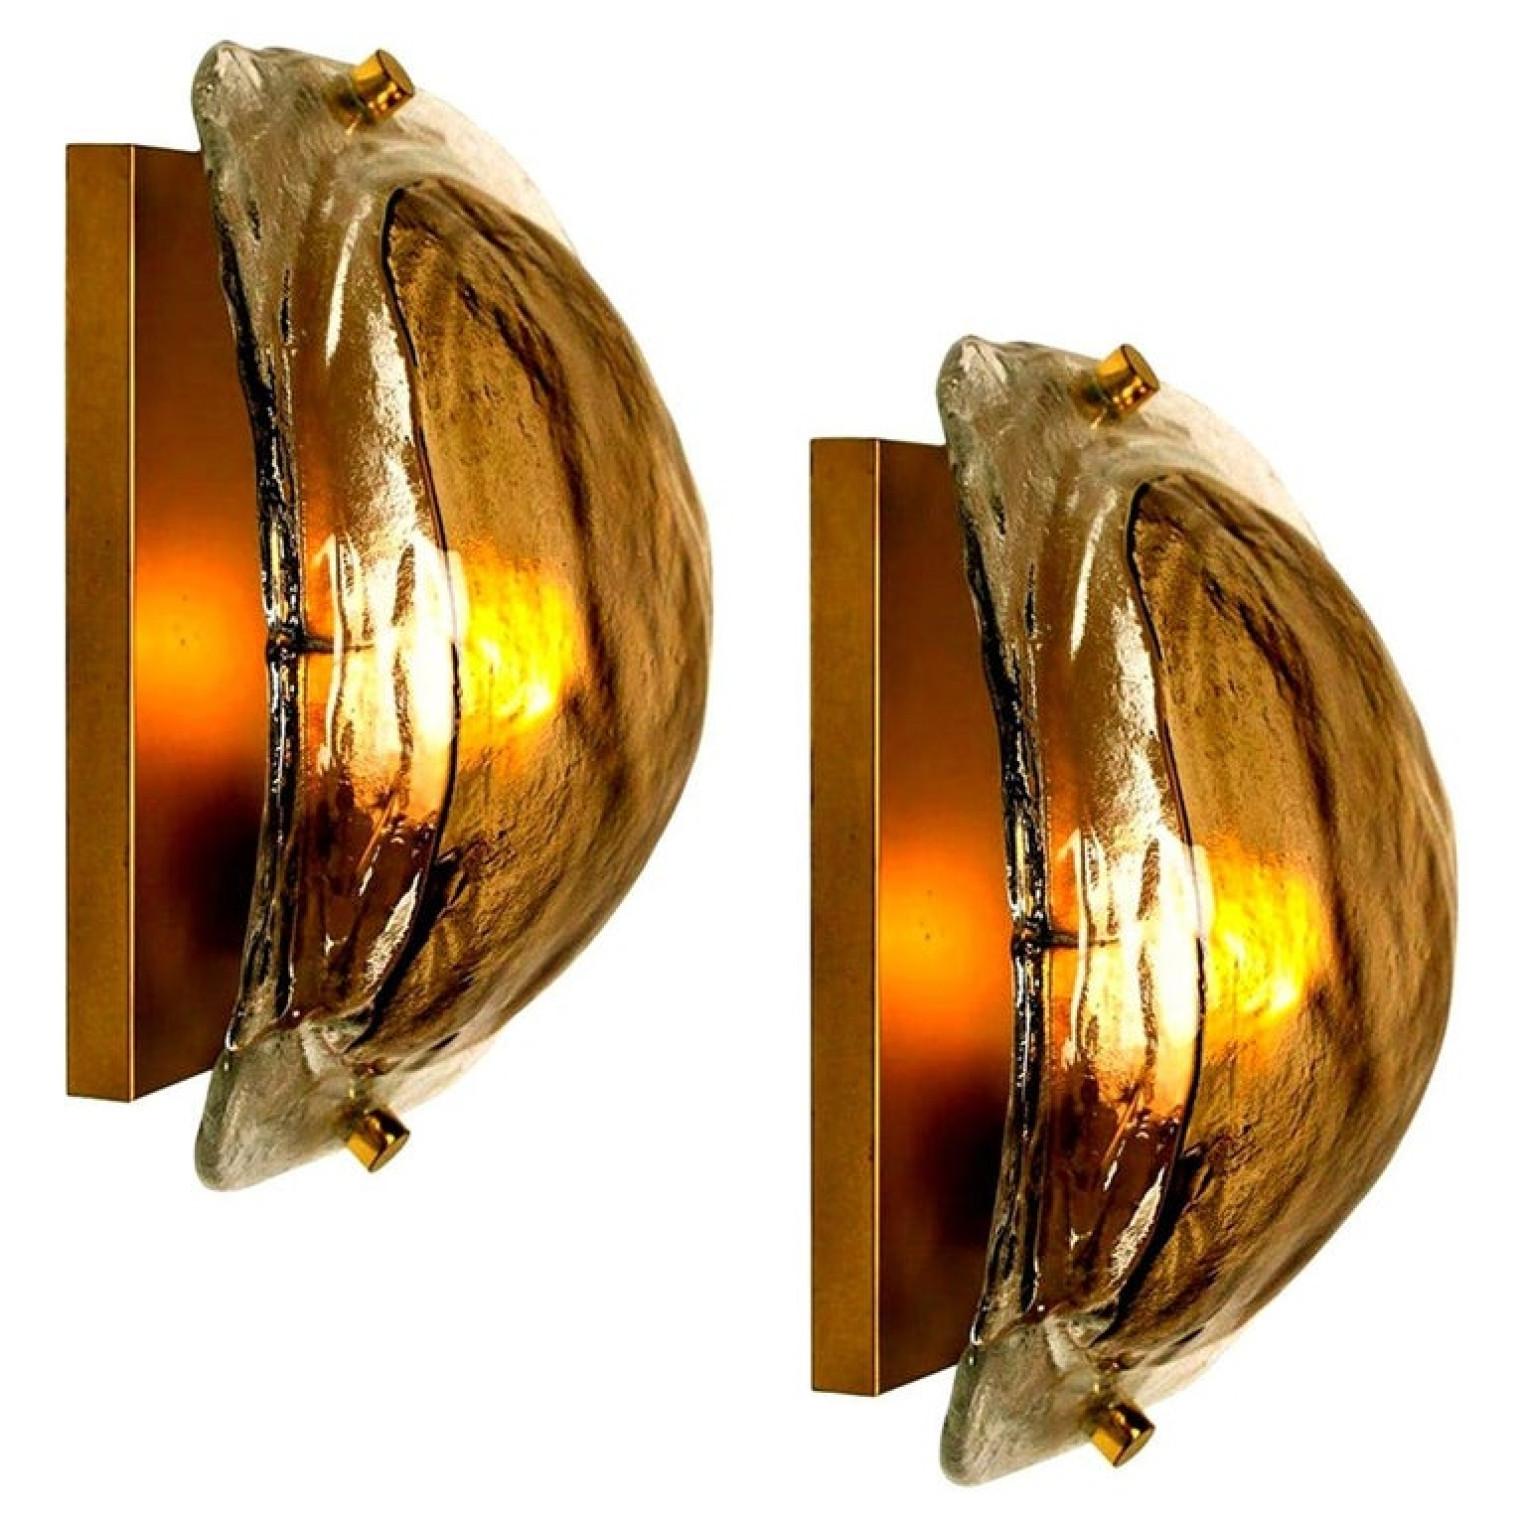 Pair of high end wall sconces made of hand blown clear and opal and brown (smoked) Murano glass on a messing hardware designed and produced by J.T. Kalmar, Austria in the 1960s. Minimalistic design executed with a taste for excellence in